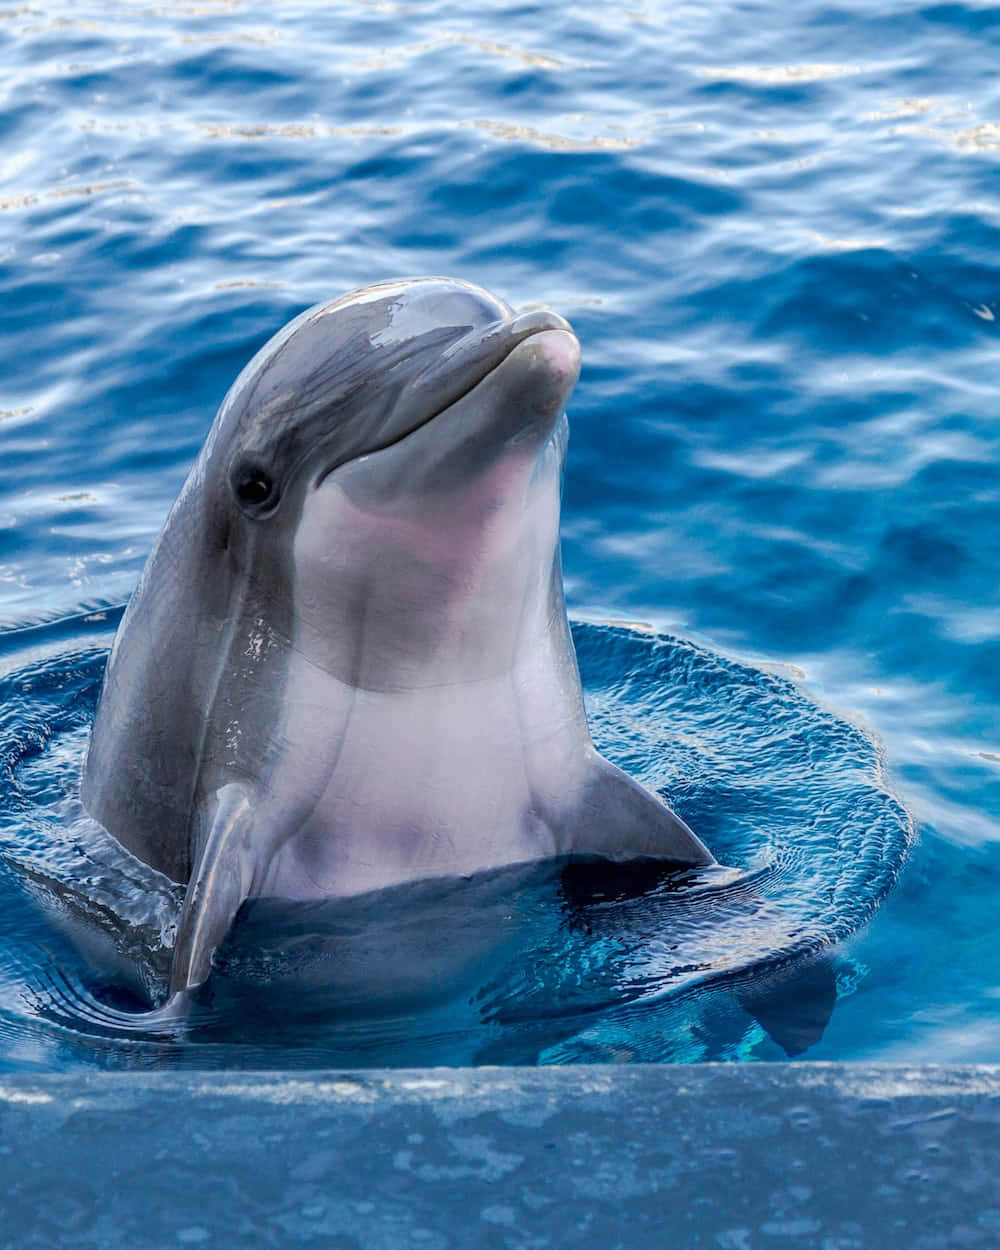 A Bottlenose Dolphin Splashing in the Water